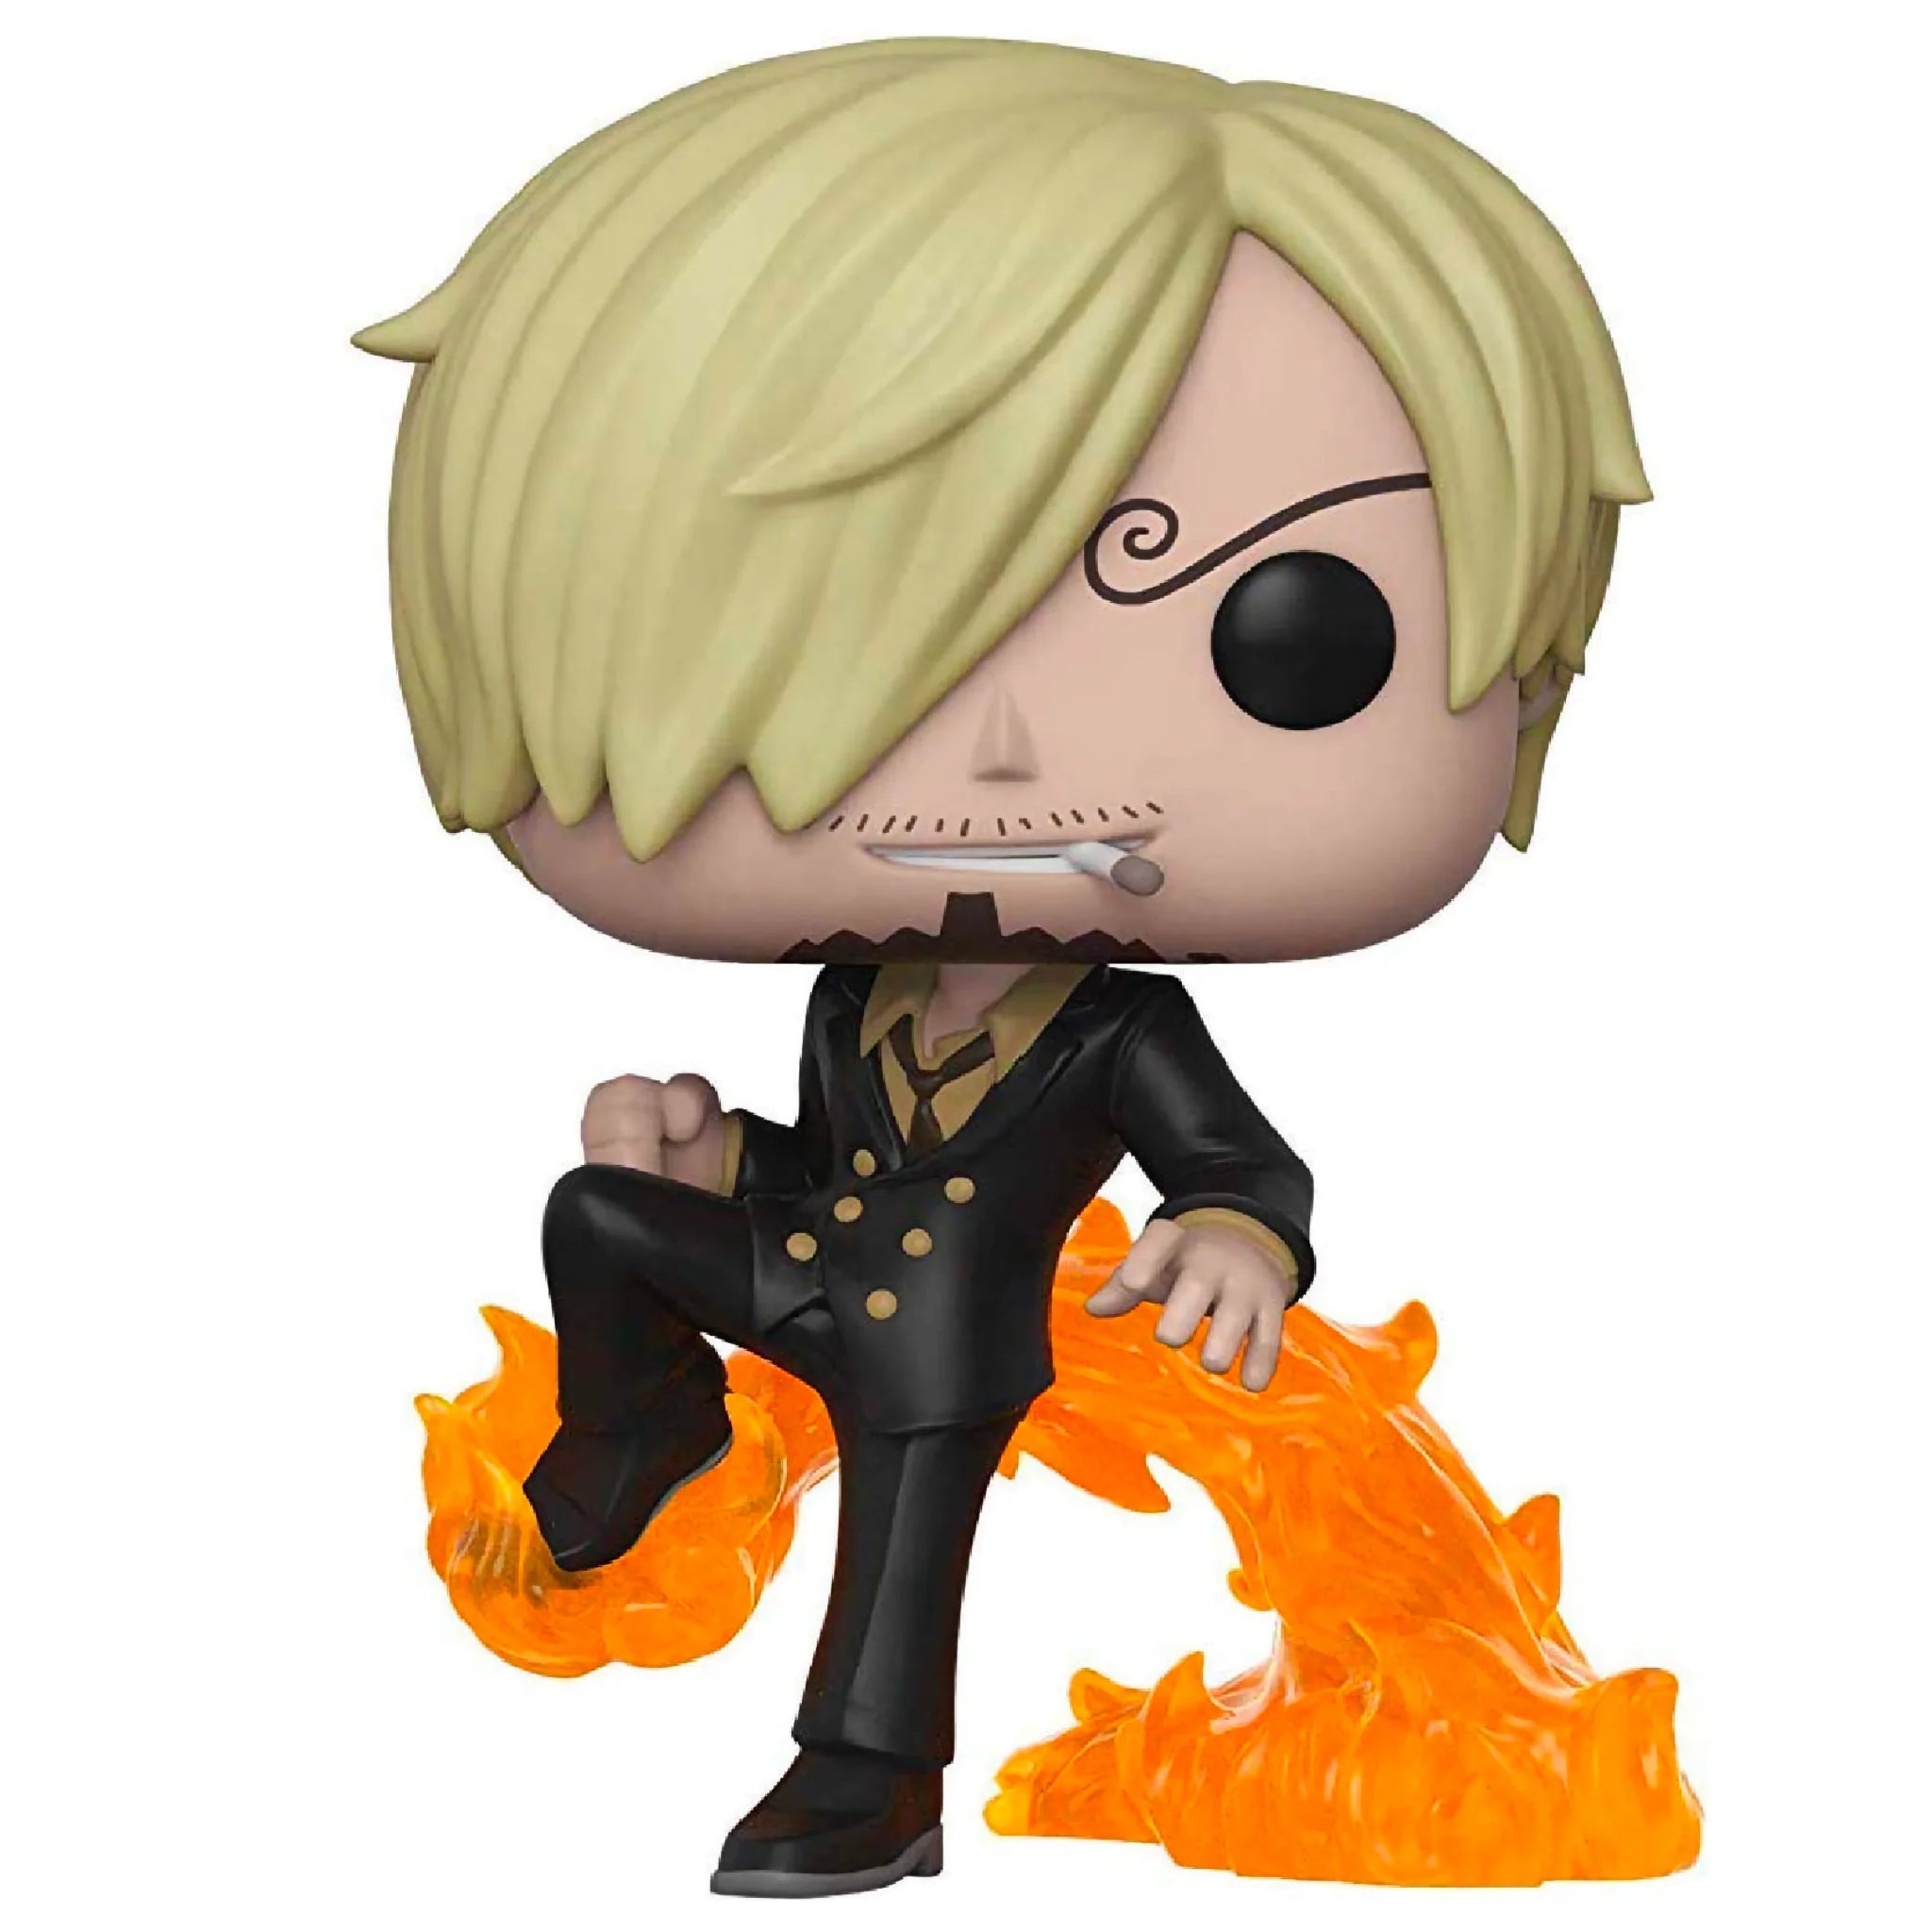 Sanji Funko Pop Review and Unboxing